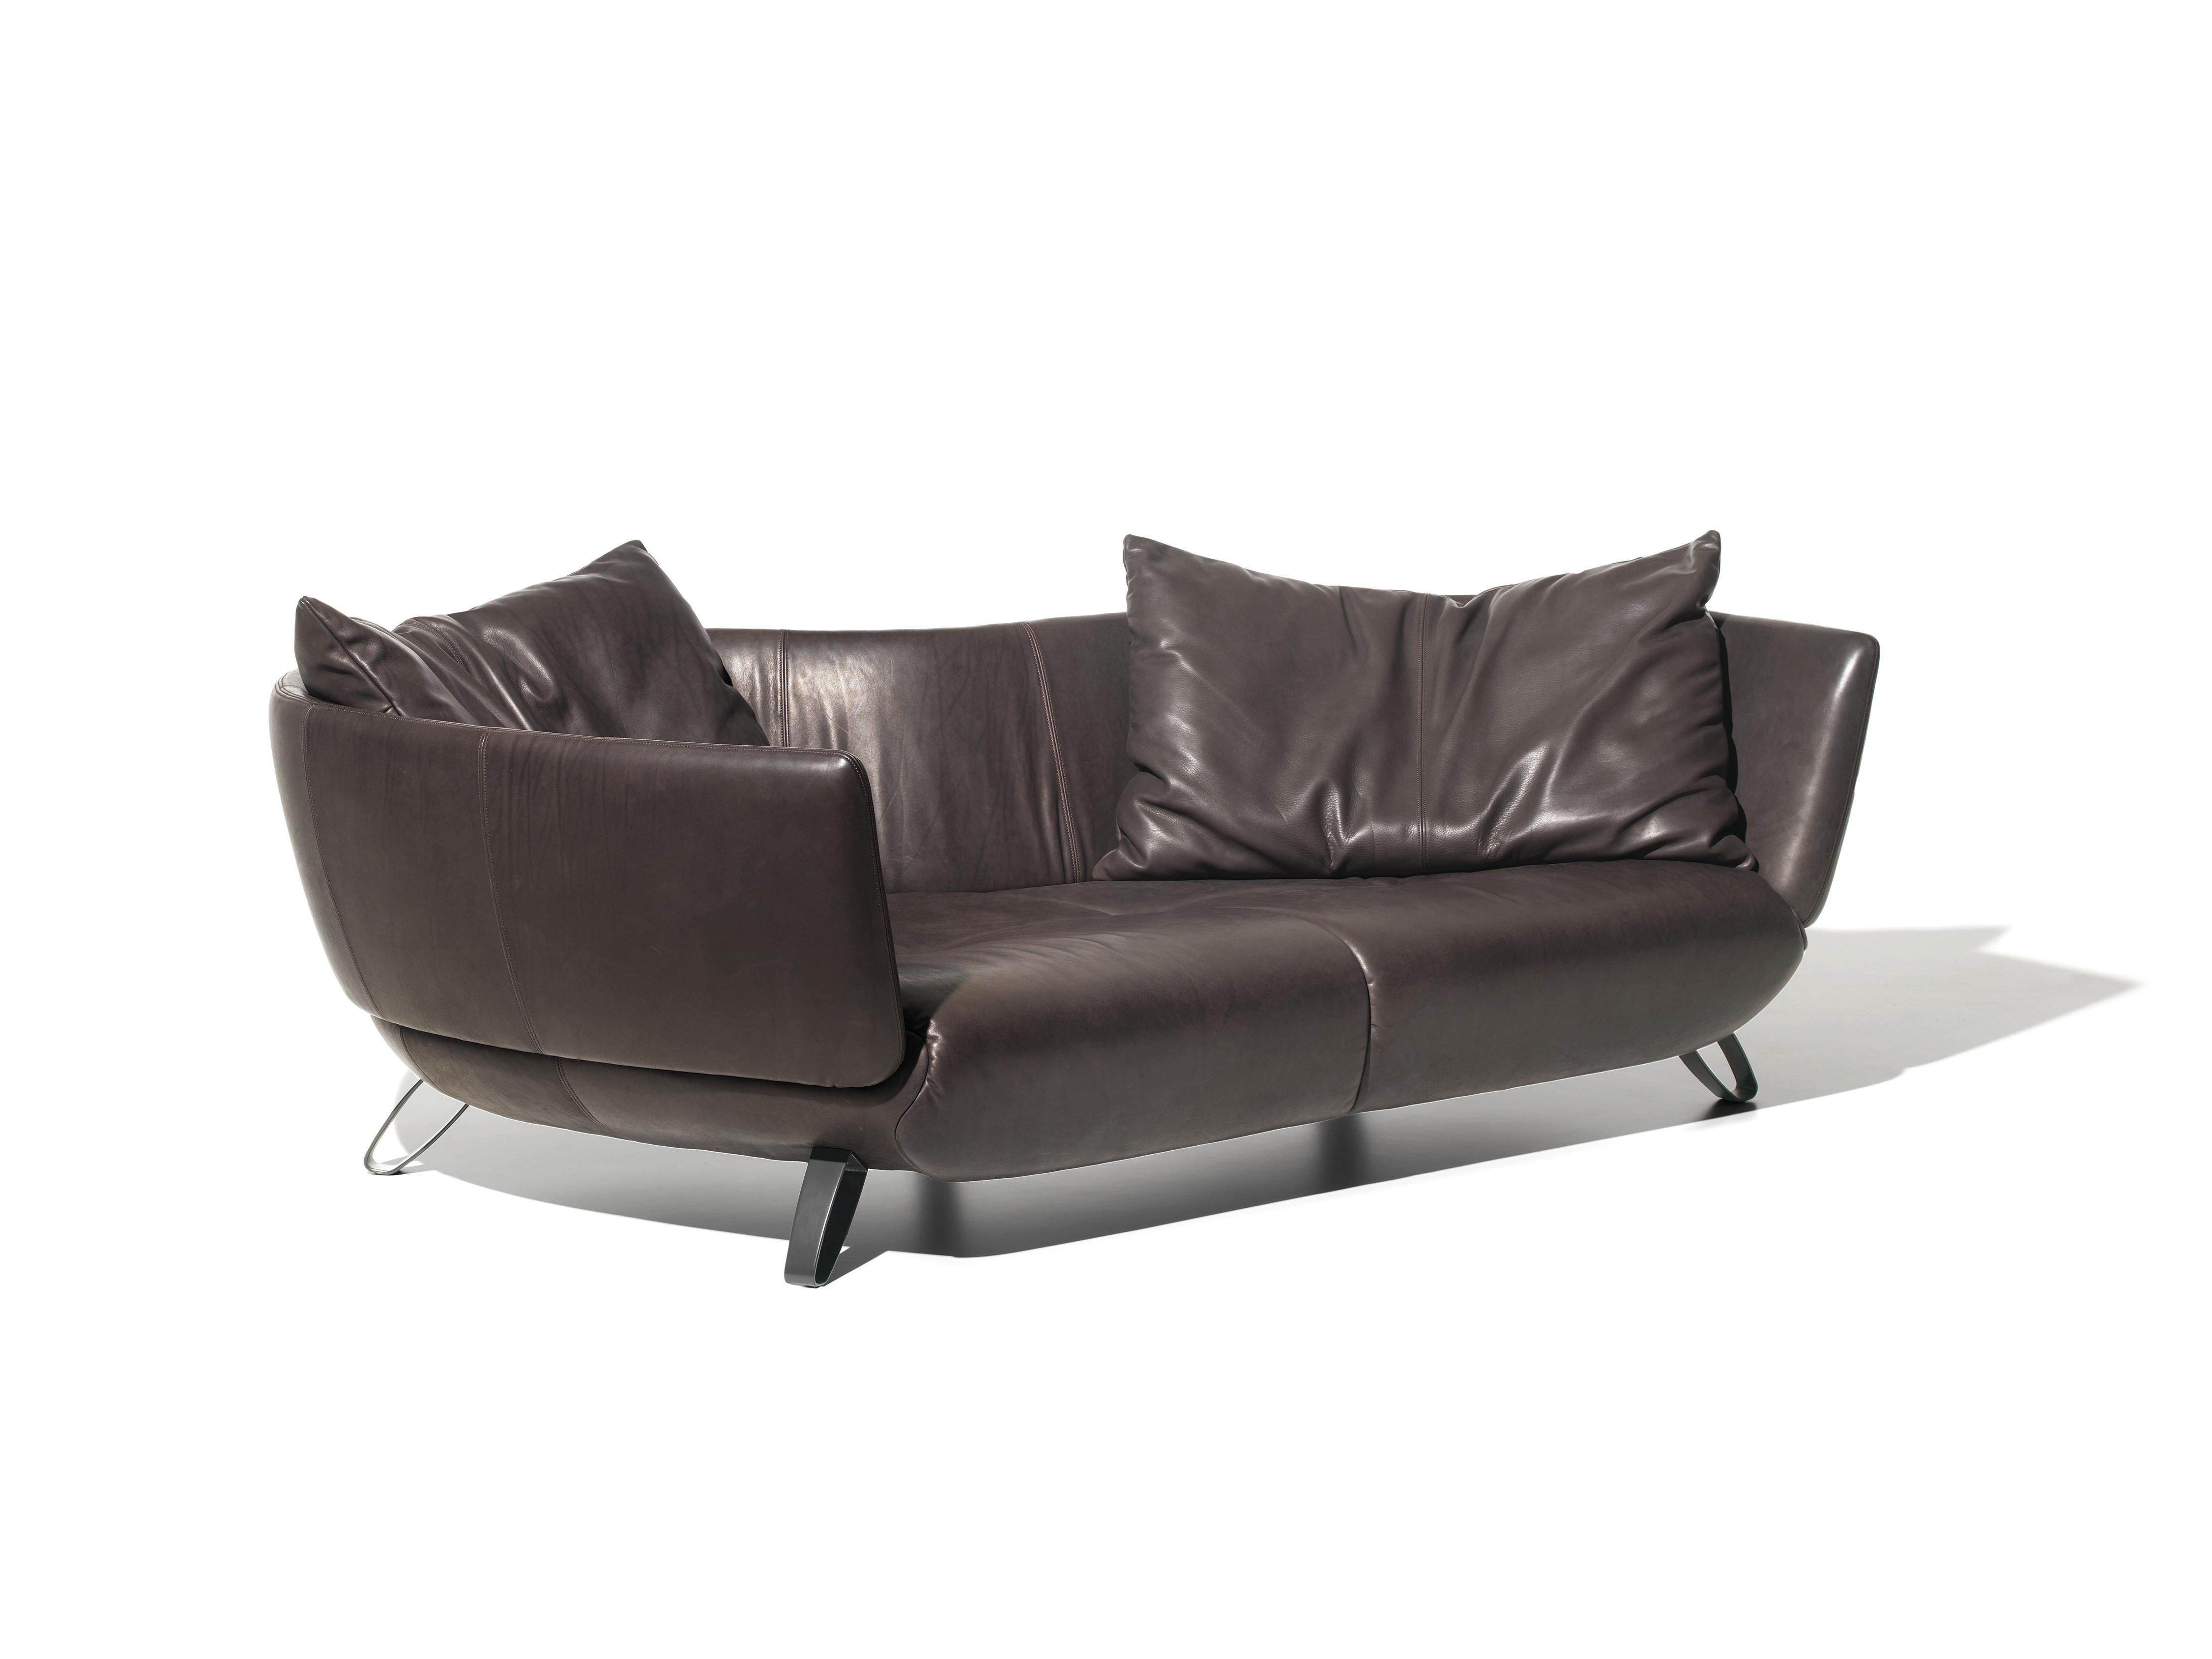 DS-102 sofa by De Sede
The cushions are optional, please contact us.
Dimensions: D 90 x W 235 x H 77 cm
Materials: Aluminium, leather

Prices may change according to the chosen materials and size. 

A series with an eye-catching, core leather